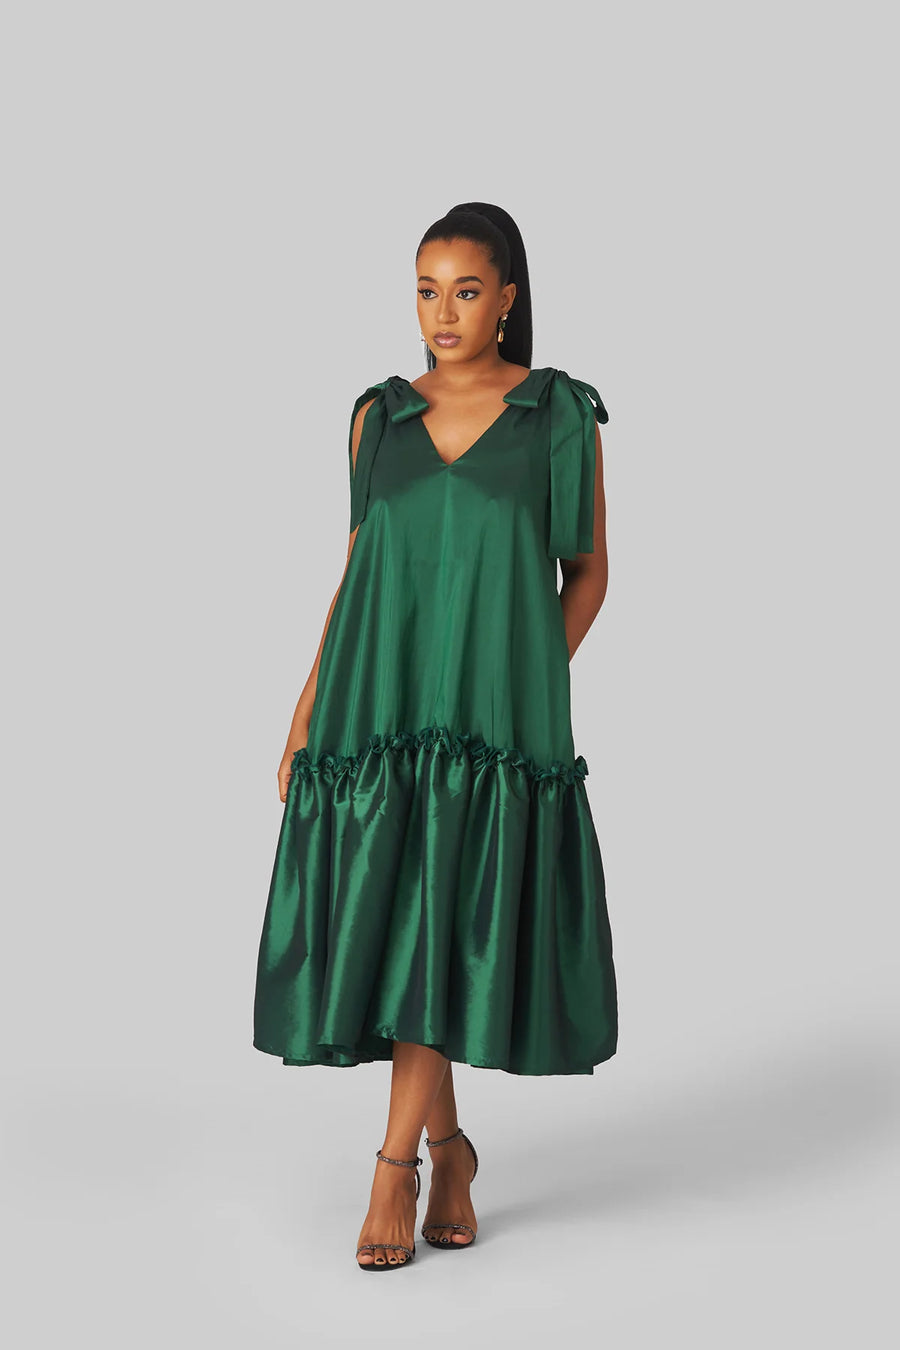 M.O.T Yinx dress, Loose midi dress with a deep V neckline and Tie details